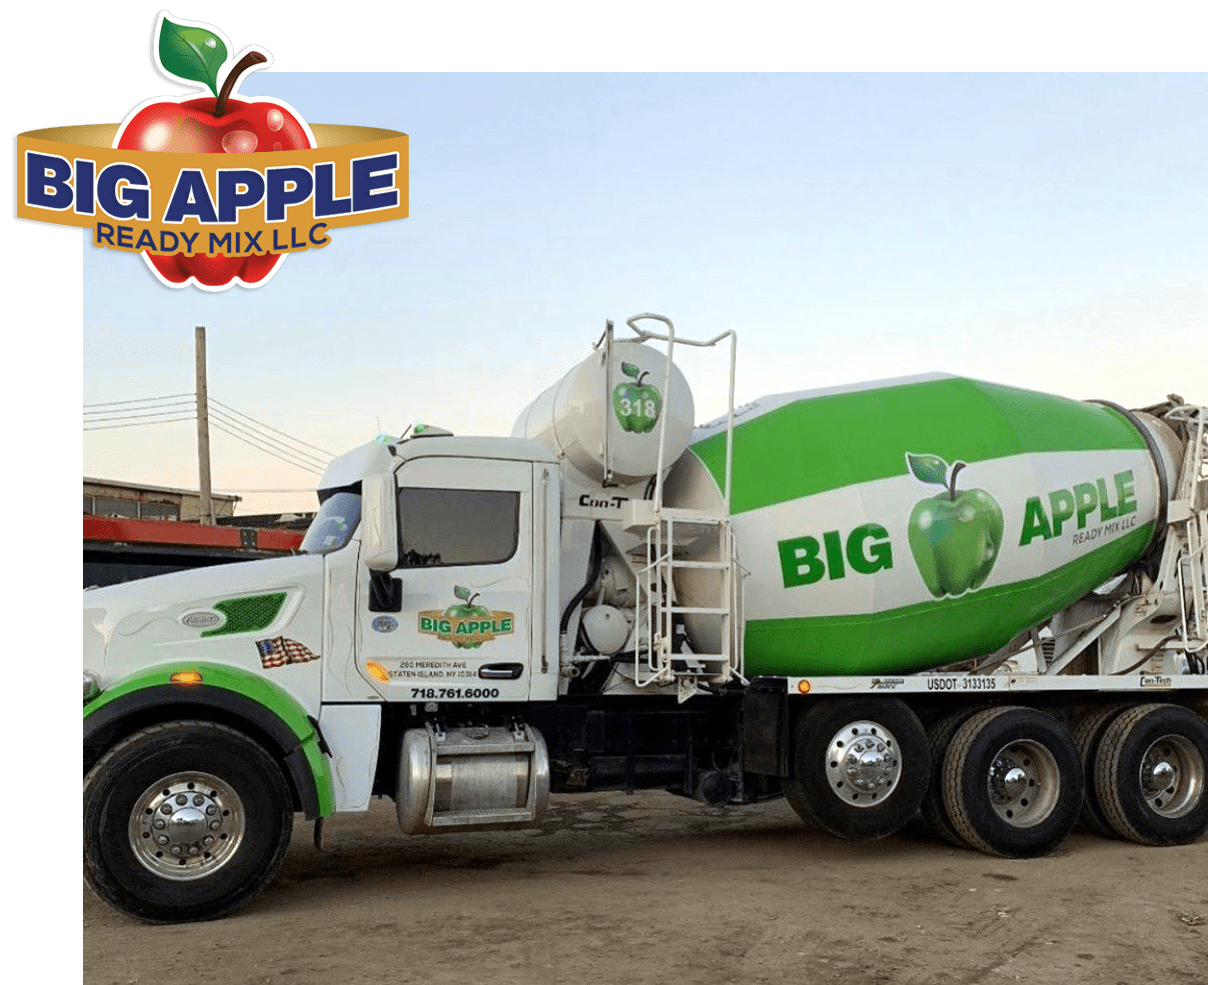 About - Big Apple Ready Mix - Ready Mix Concrete Supplier in Staten Island, NY